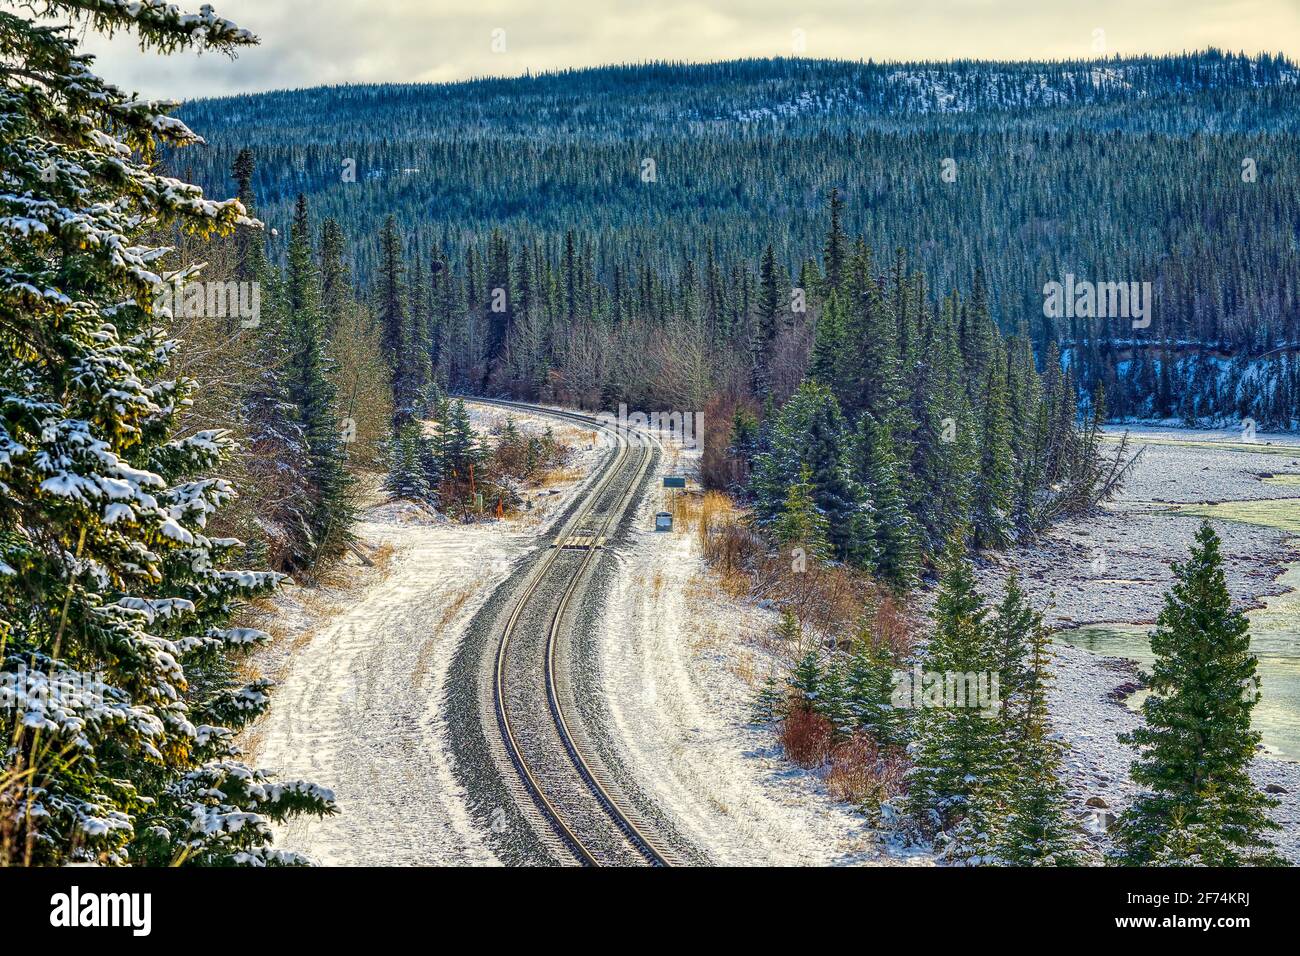 Empty train tracks curving through a wooded area in rural Alberta Canada Stock Photo